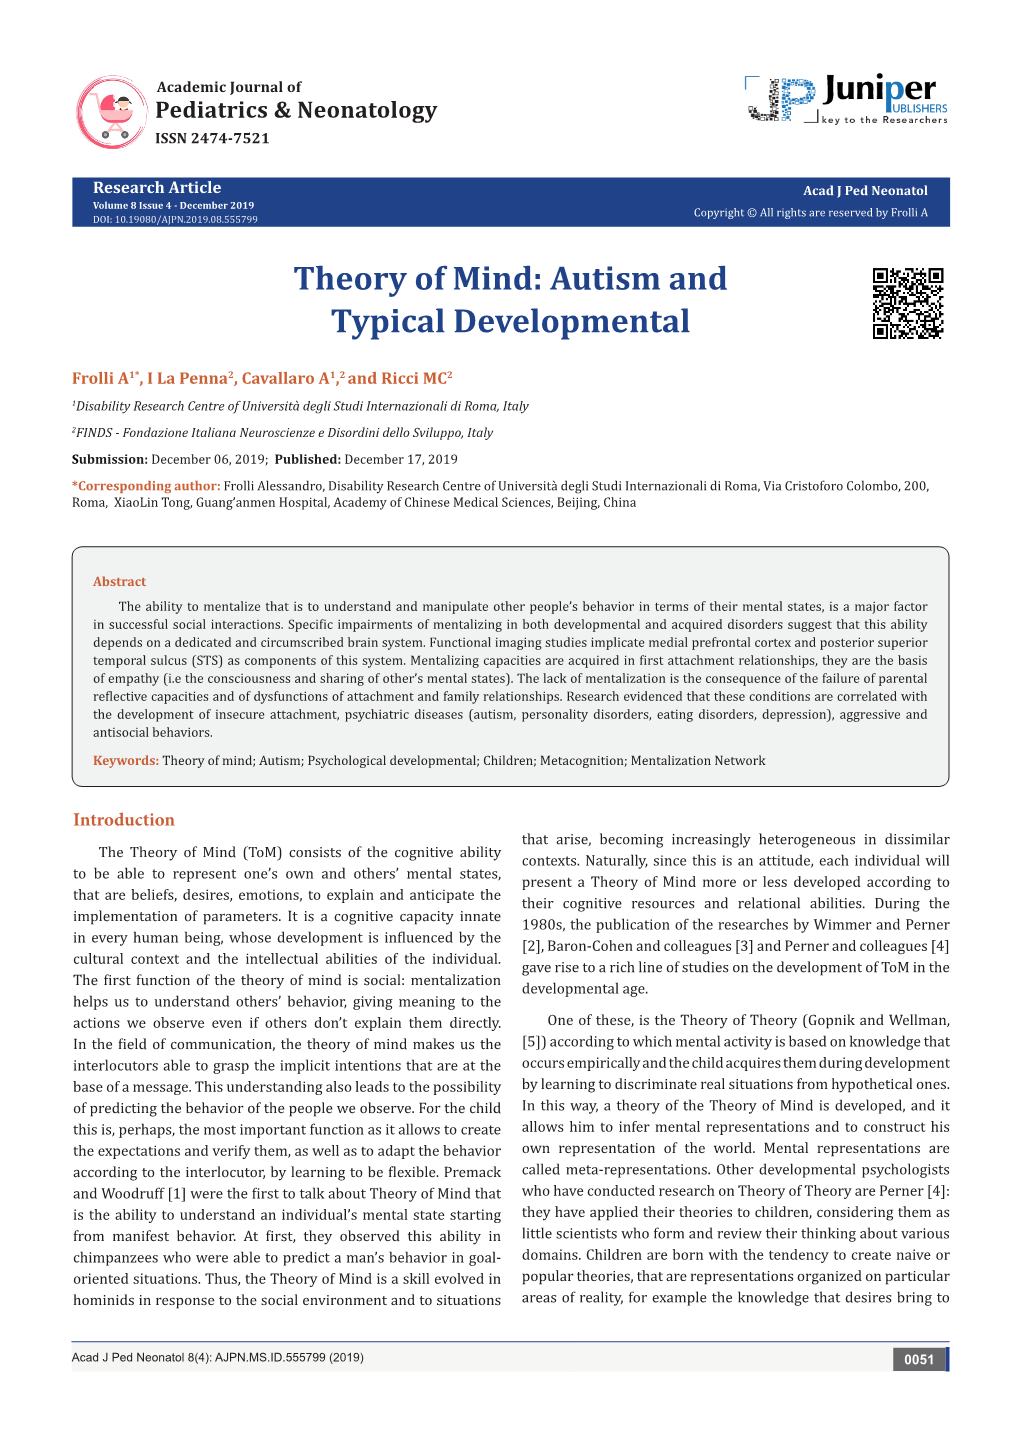 Autism and Typical Developmental